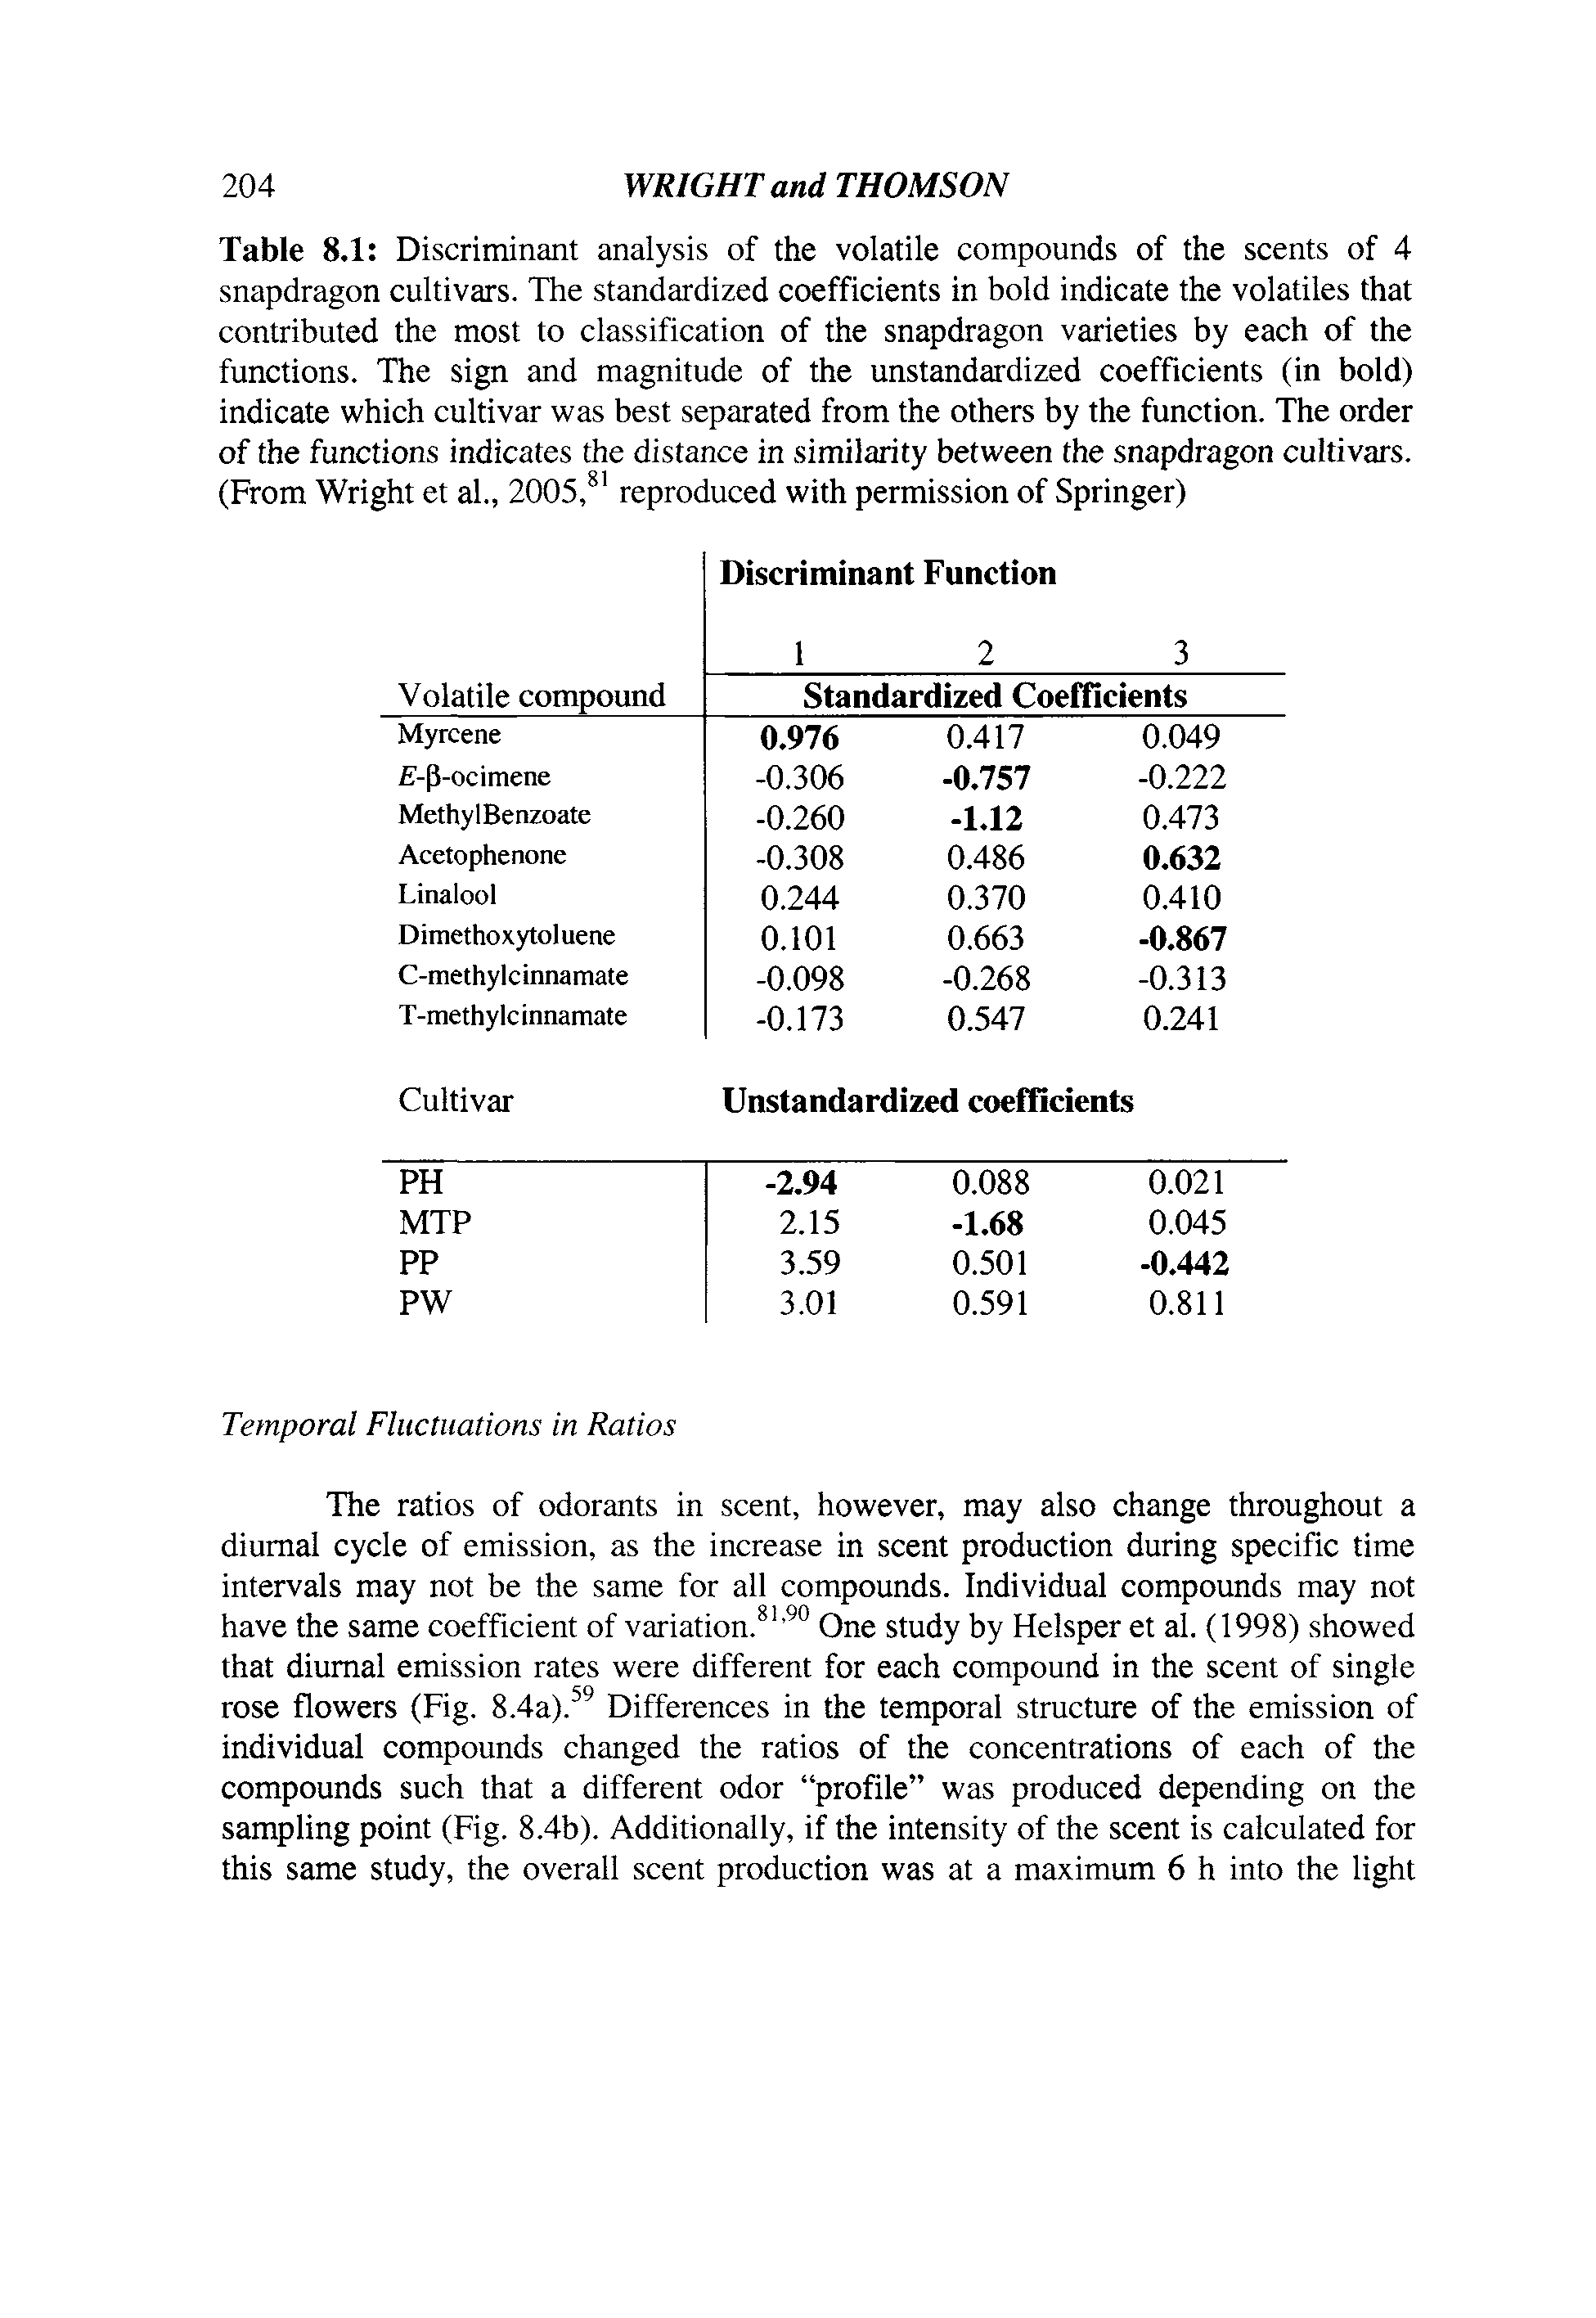 Table 8.1 Discriminant analysis of the volatile compounds of the scents of 4 snapdragon cultivars. The standardized coefficients in bold indicate the volatiles that contributed the most to classification of the snapdragon varieties by each of the functions. The sign and magnitude of the unstandardized coefficients (in bold) indicate which cultivar was best separated from the others by the function. The order of the functions indicates the distance in similarity between the snapdragon cultivars. (From Wright et al., 2005, reproduced with permission of Springer)...